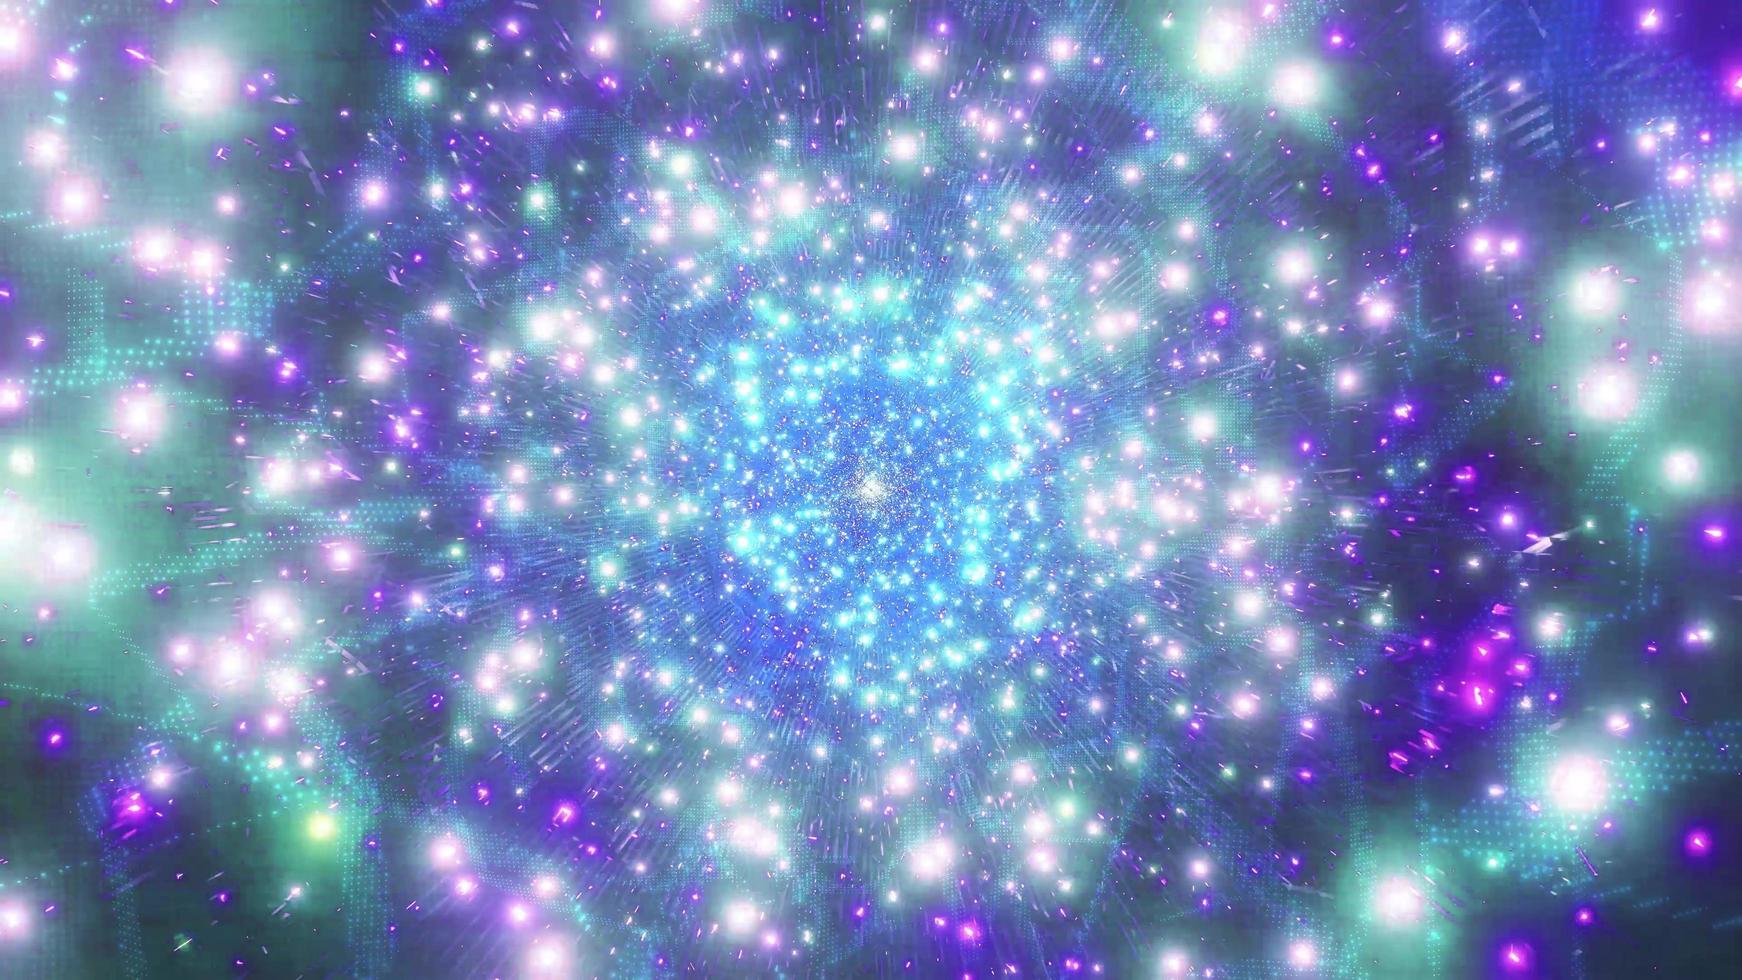 Blue bright space galaxy particles 3d illustration background wallpaper design artwork photo